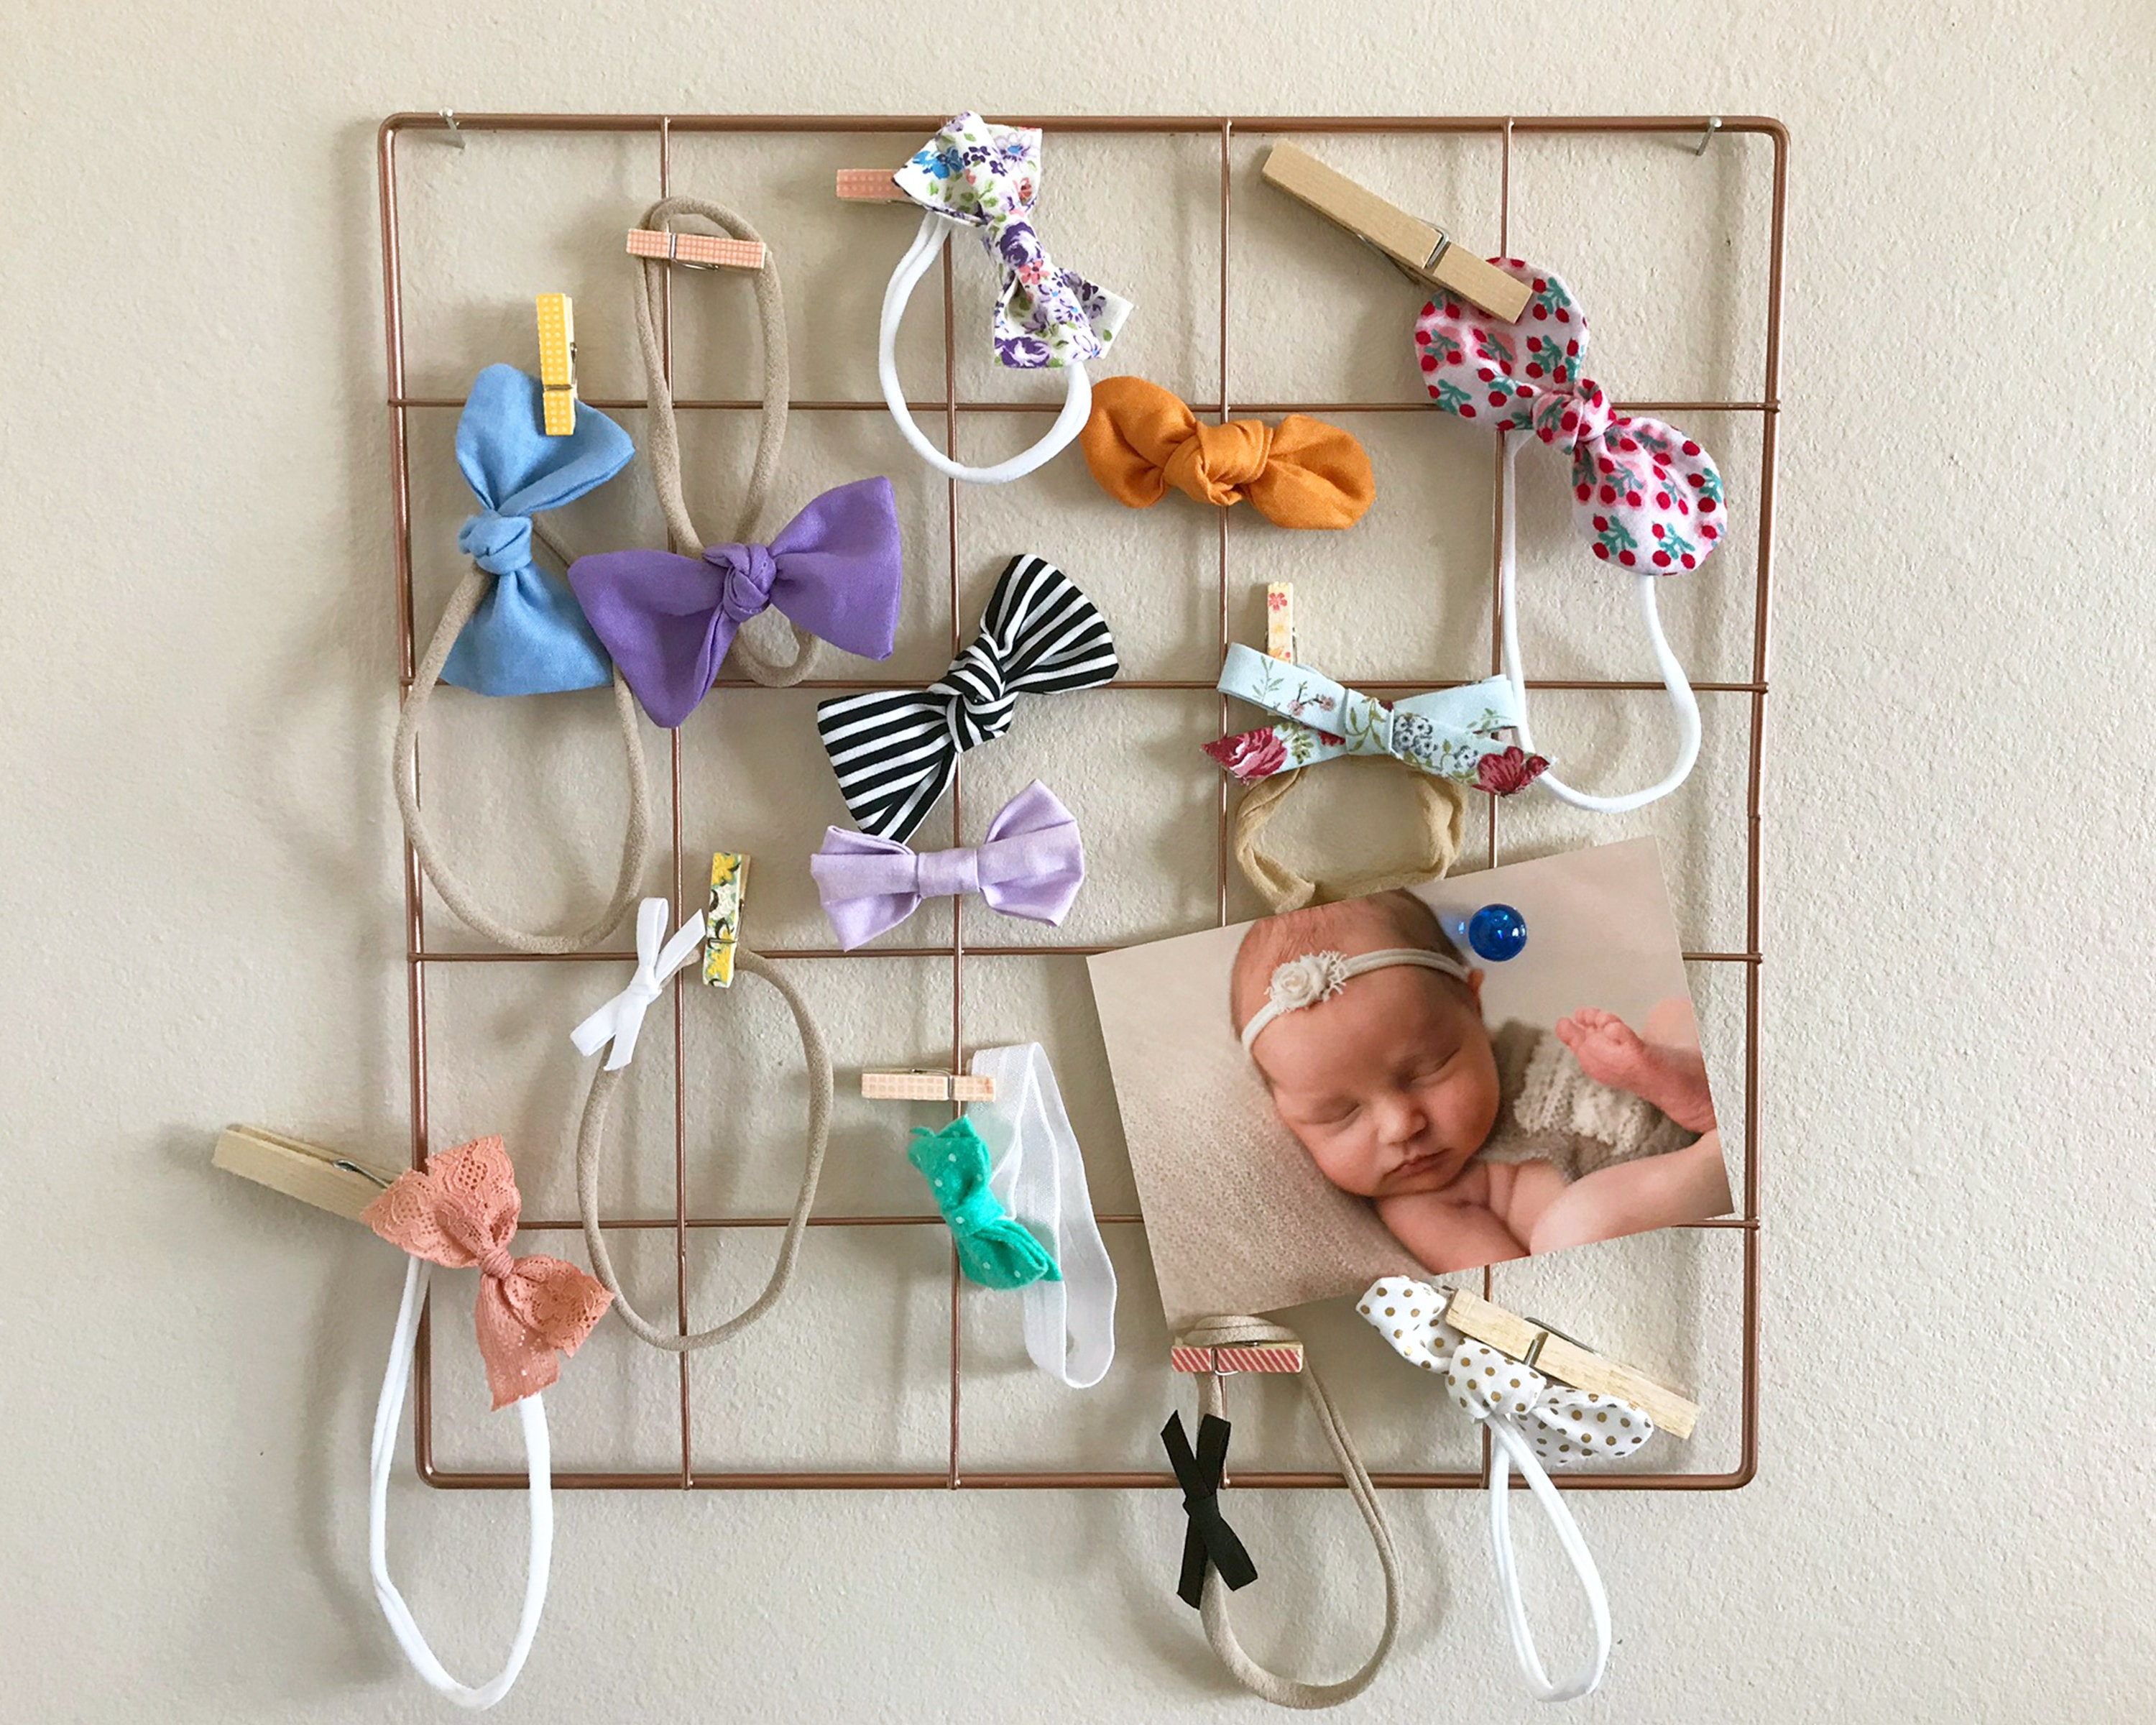  Baby Girl Hair Clips Bows Accessories and Products Organizer  and Holder Storage Closet Cloud Wall Hanging Decor Nordic Scandi for  Nursery or Baby Room : Baby